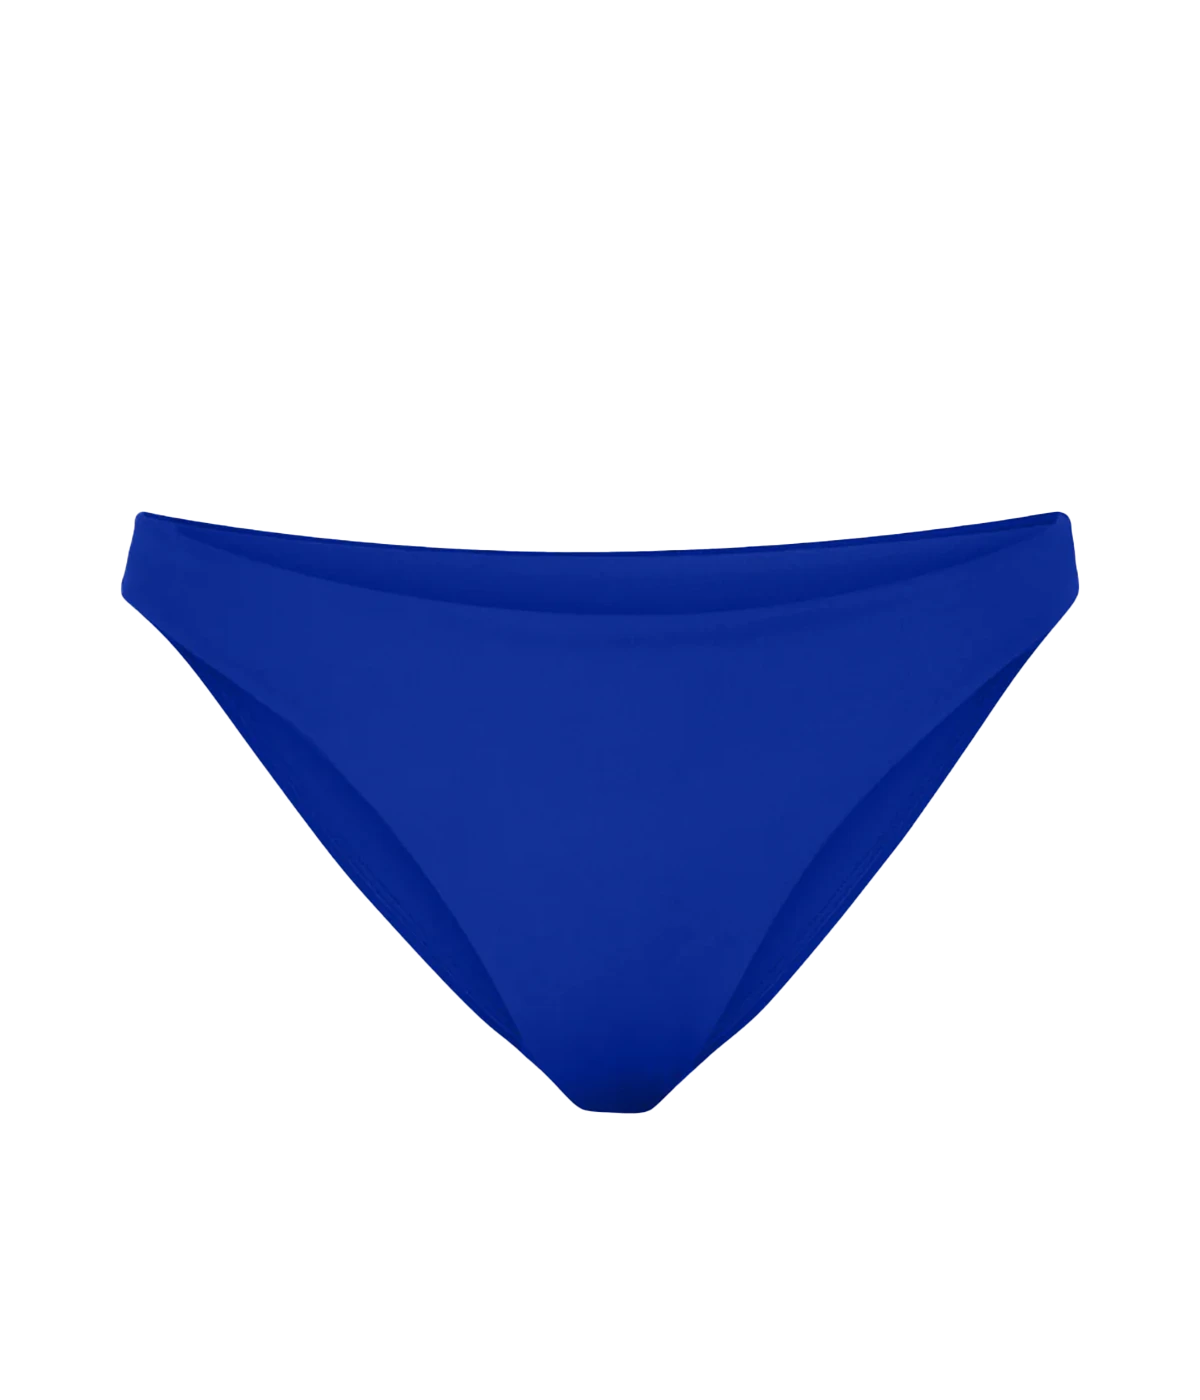 This bikini bottom in First Place, a royal blue will become a staple whenever you go to the beach and the pool. Double lined for comfort, wear this bikini everywhere, all day.    The Wear To Bottom features a low-rise bottom, medium bum coverage and a low-cut leg. Double lined for comfort, wear this bikini everywhere, all day.